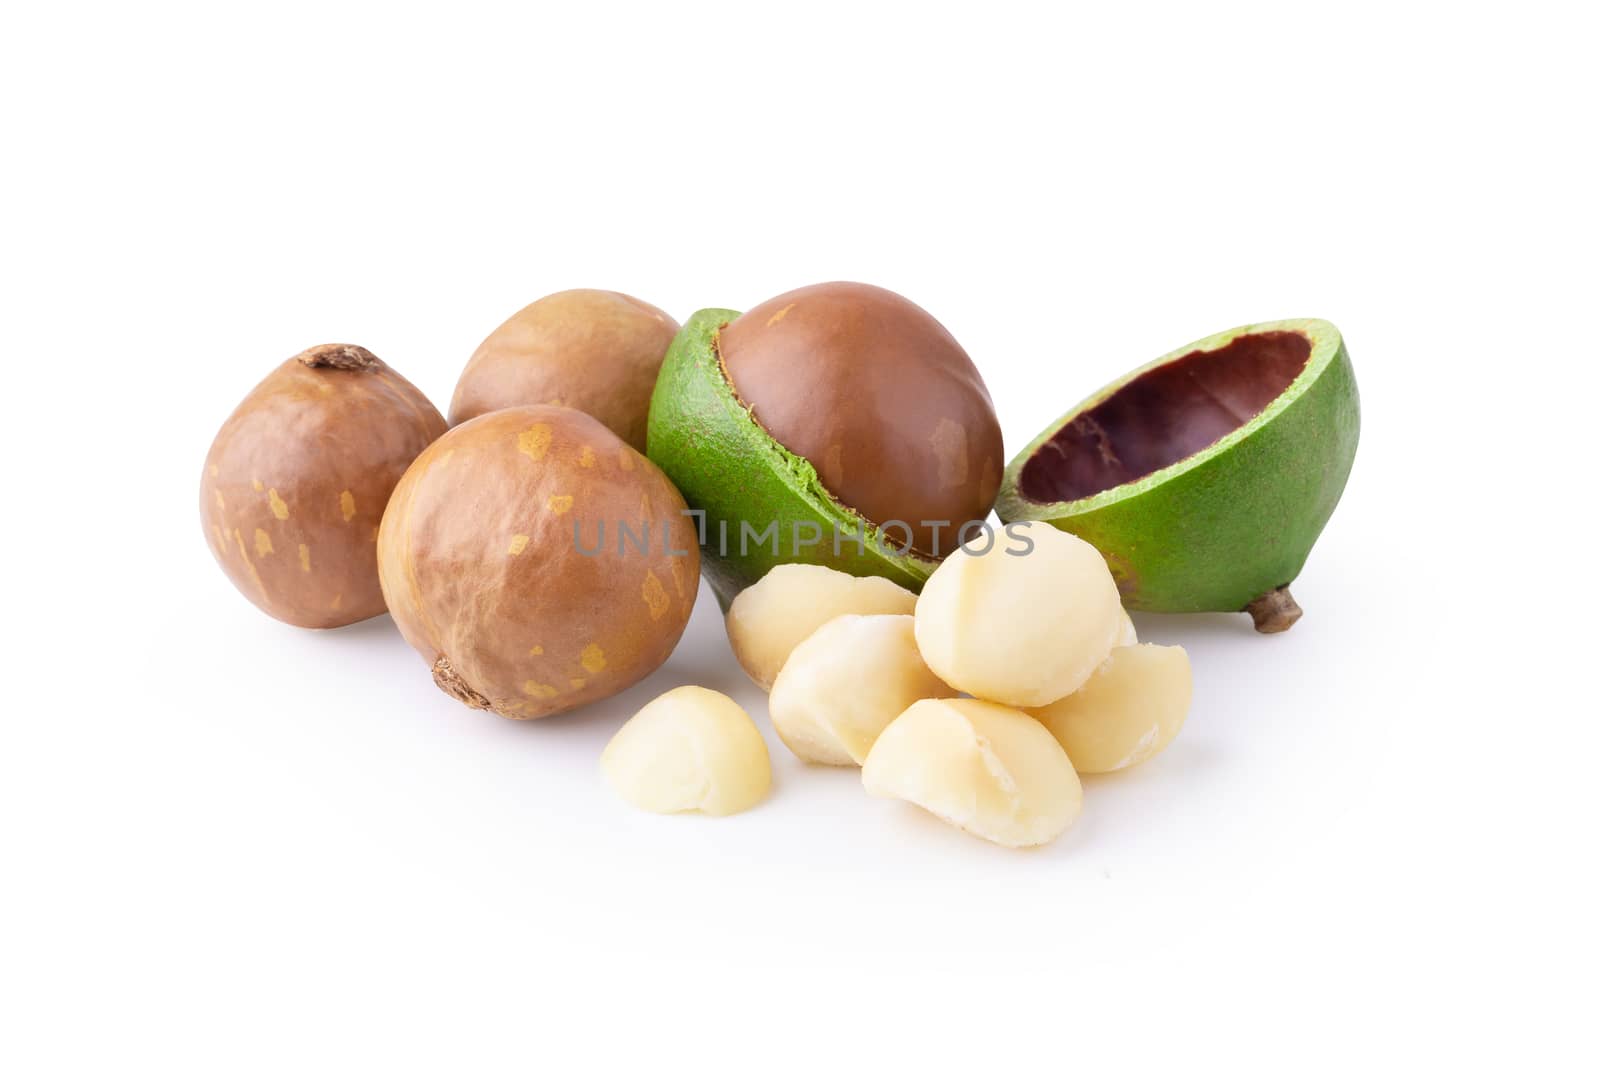 Macadamia nuts isolated on a white background by kaiskynet